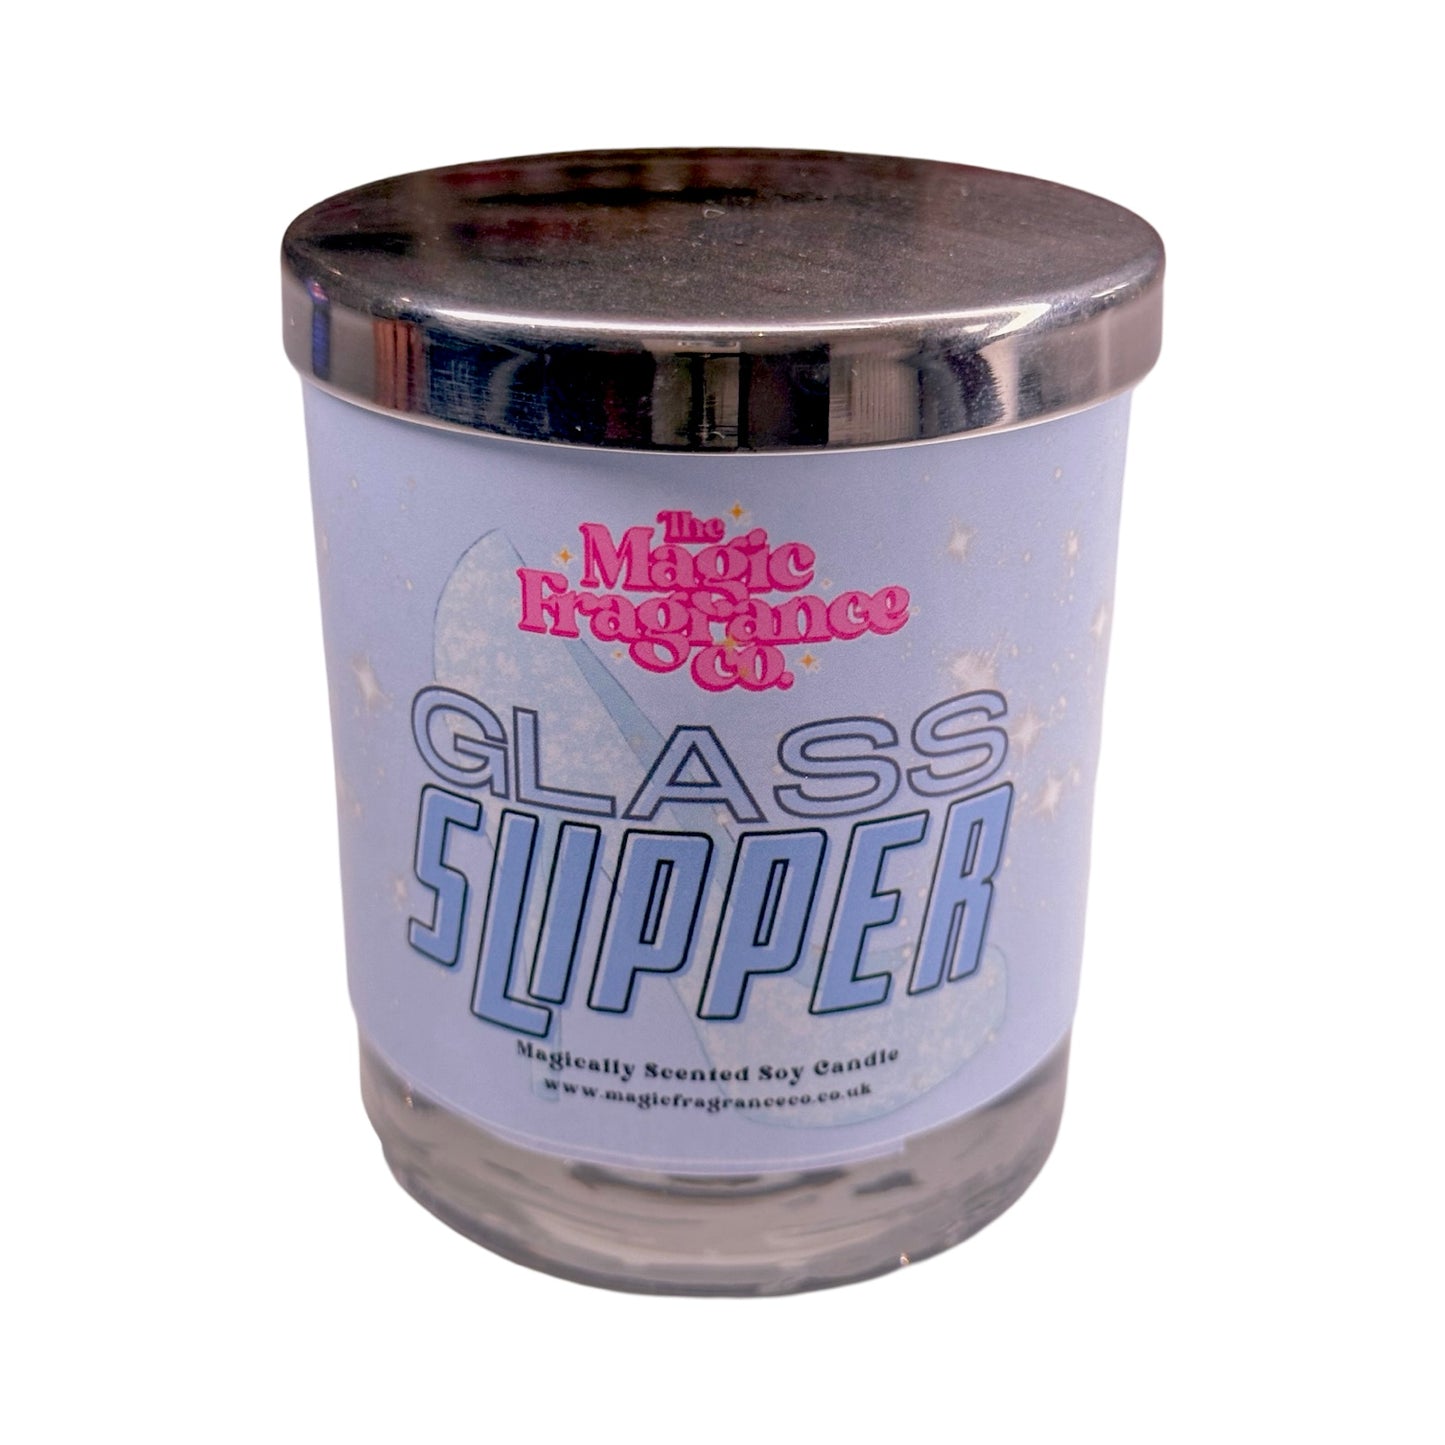 Glass Slipper Luxury Soy Candle